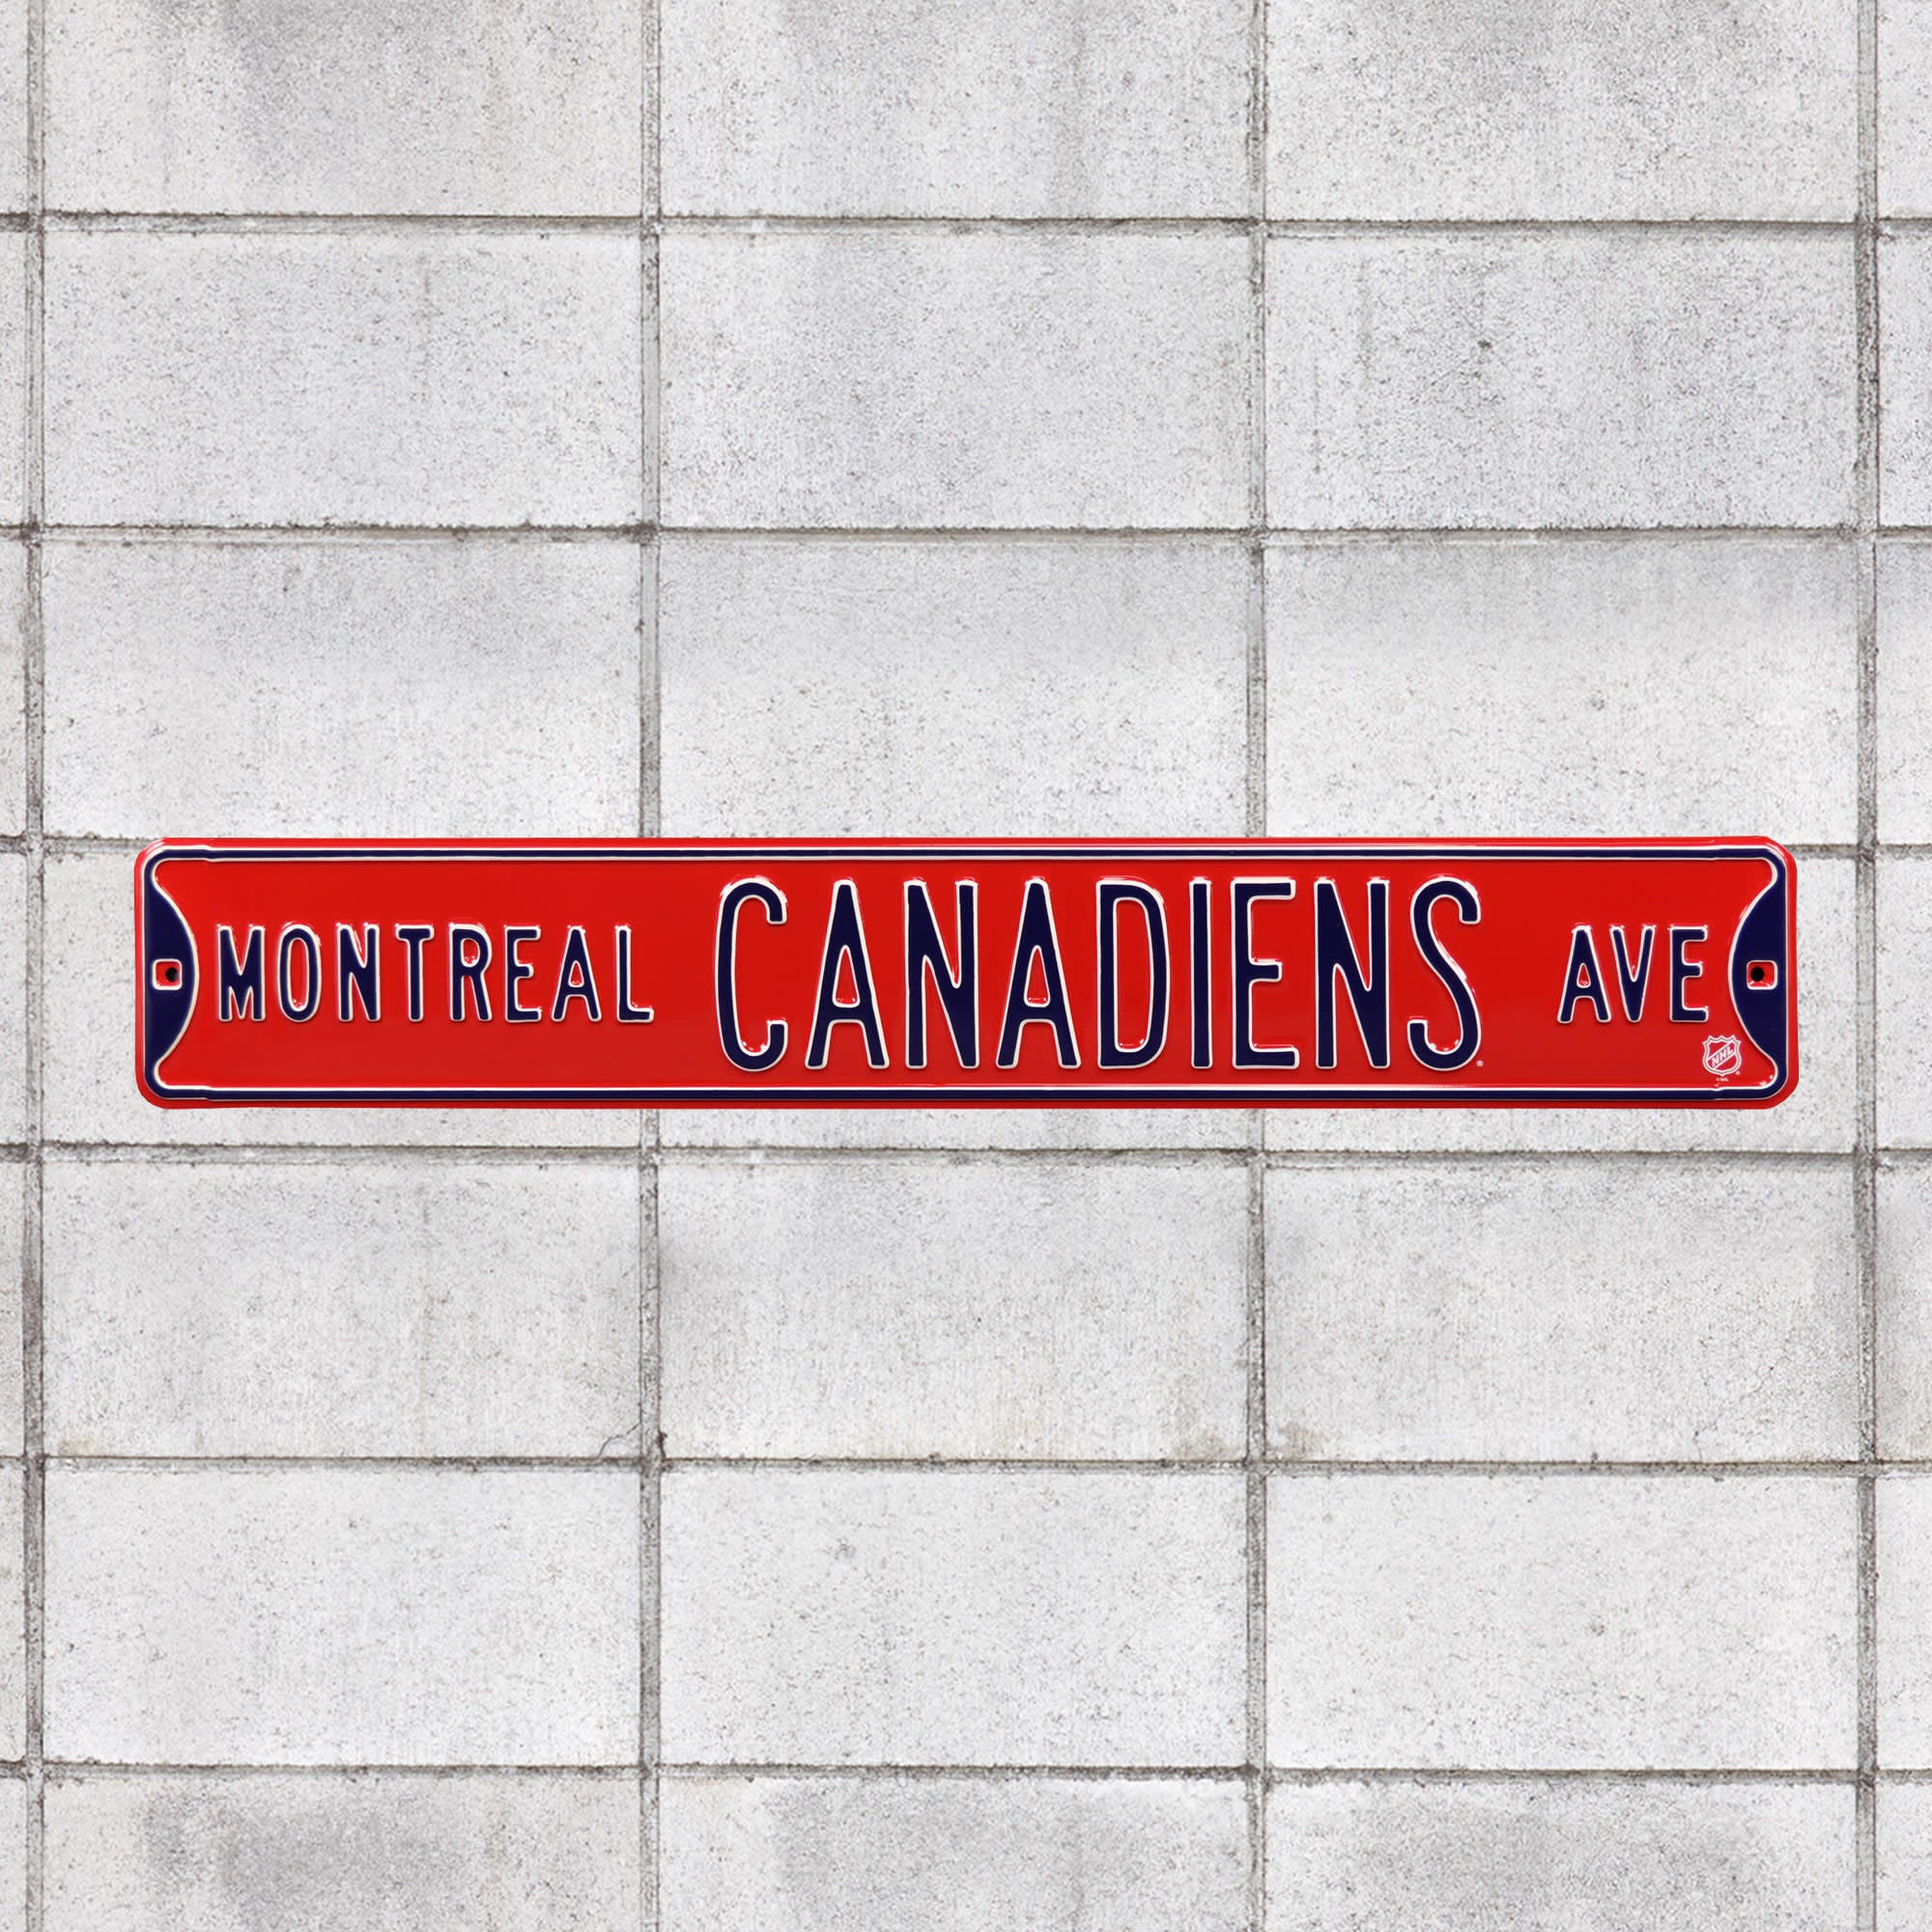 Montreal Canadiens: Montreal Canadiens Avenue - Officially Licensed NHL Metal Street Sign 36.0"W x 6.0"H by Fathead | 100% Steel